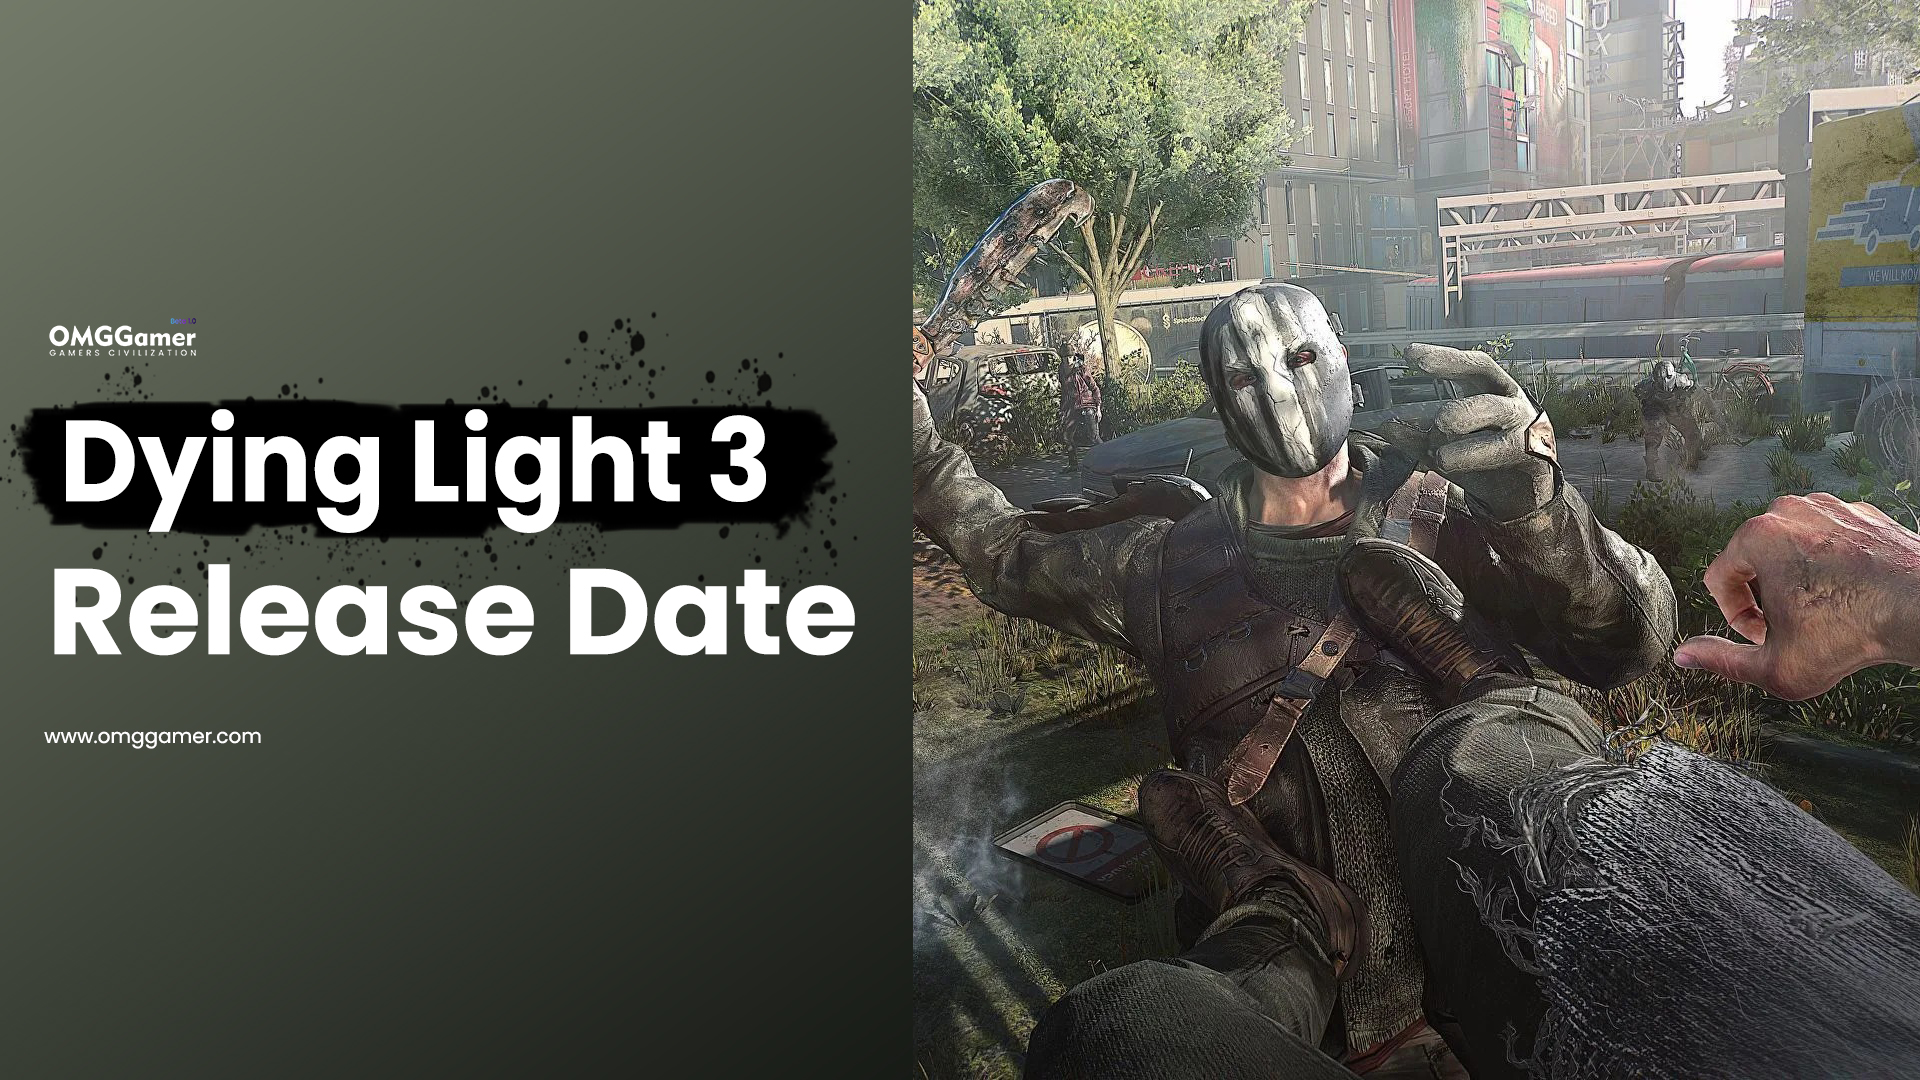 Dying Light 3 Release Date